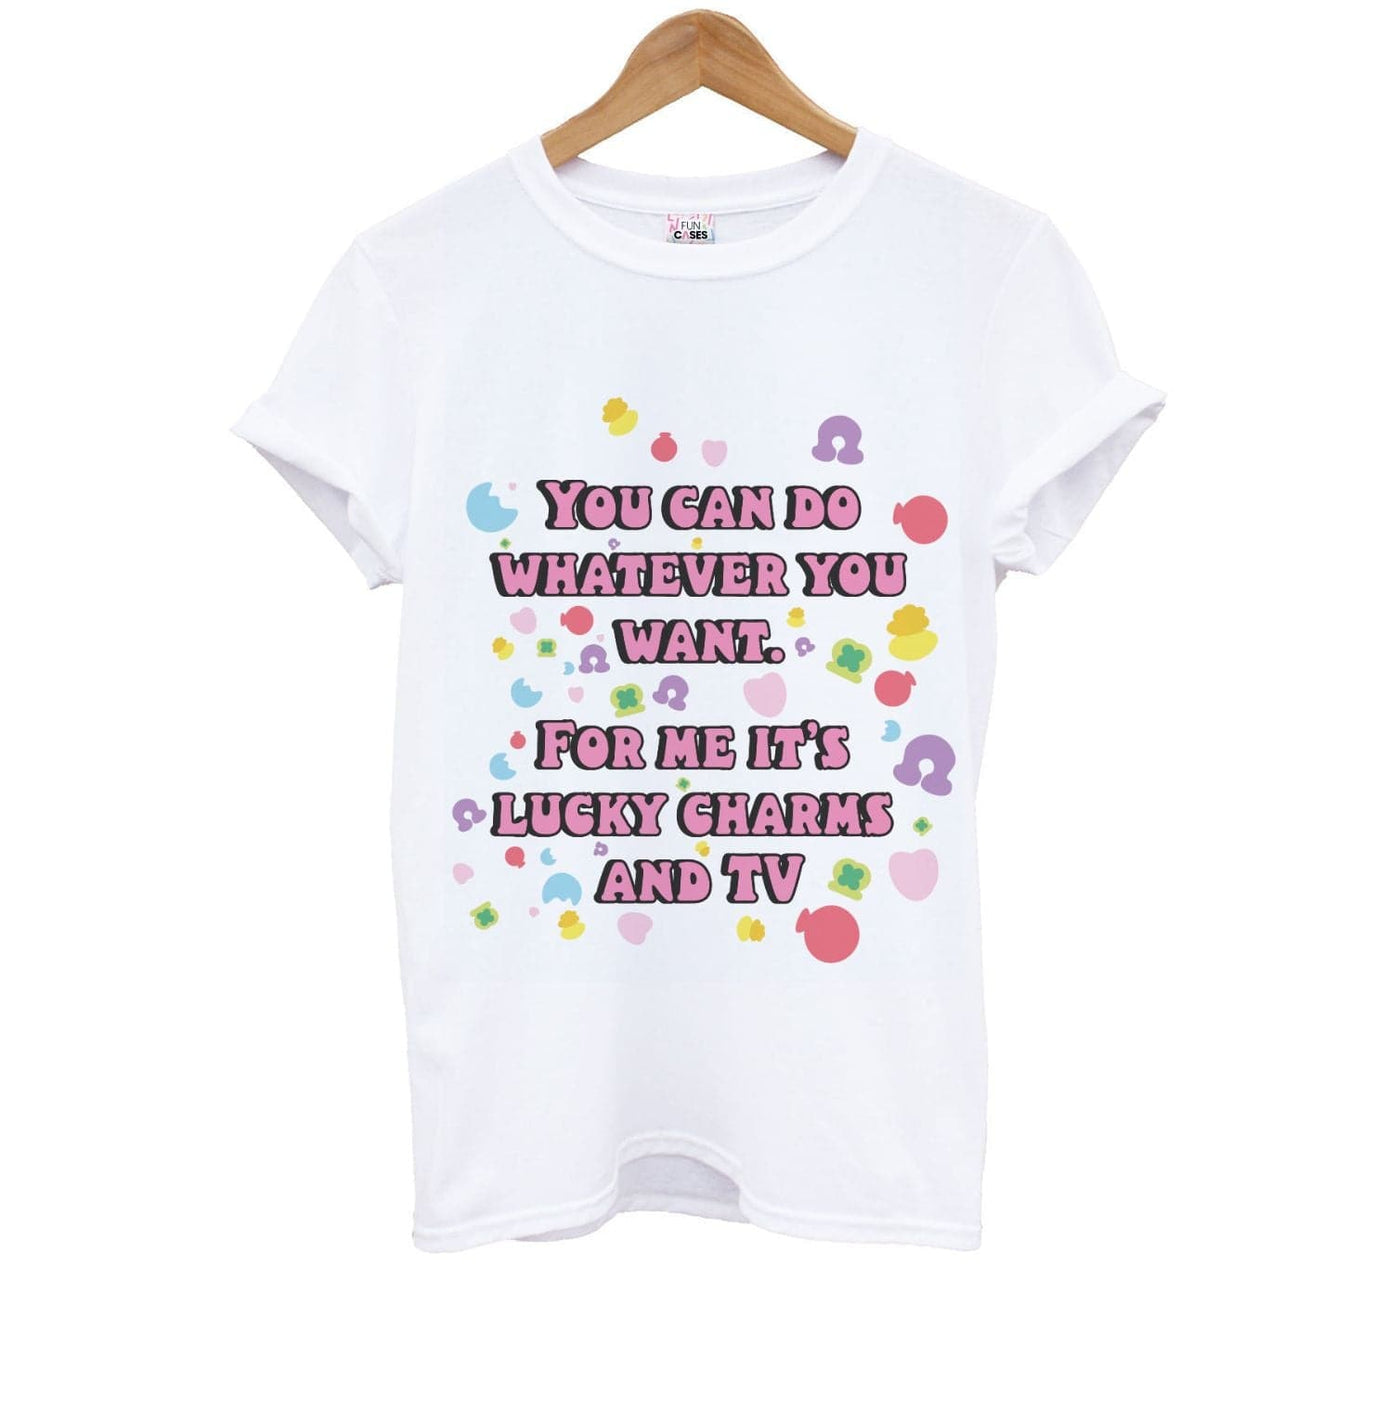 Lucky Charms And Tv- Community Kids T-Shirt